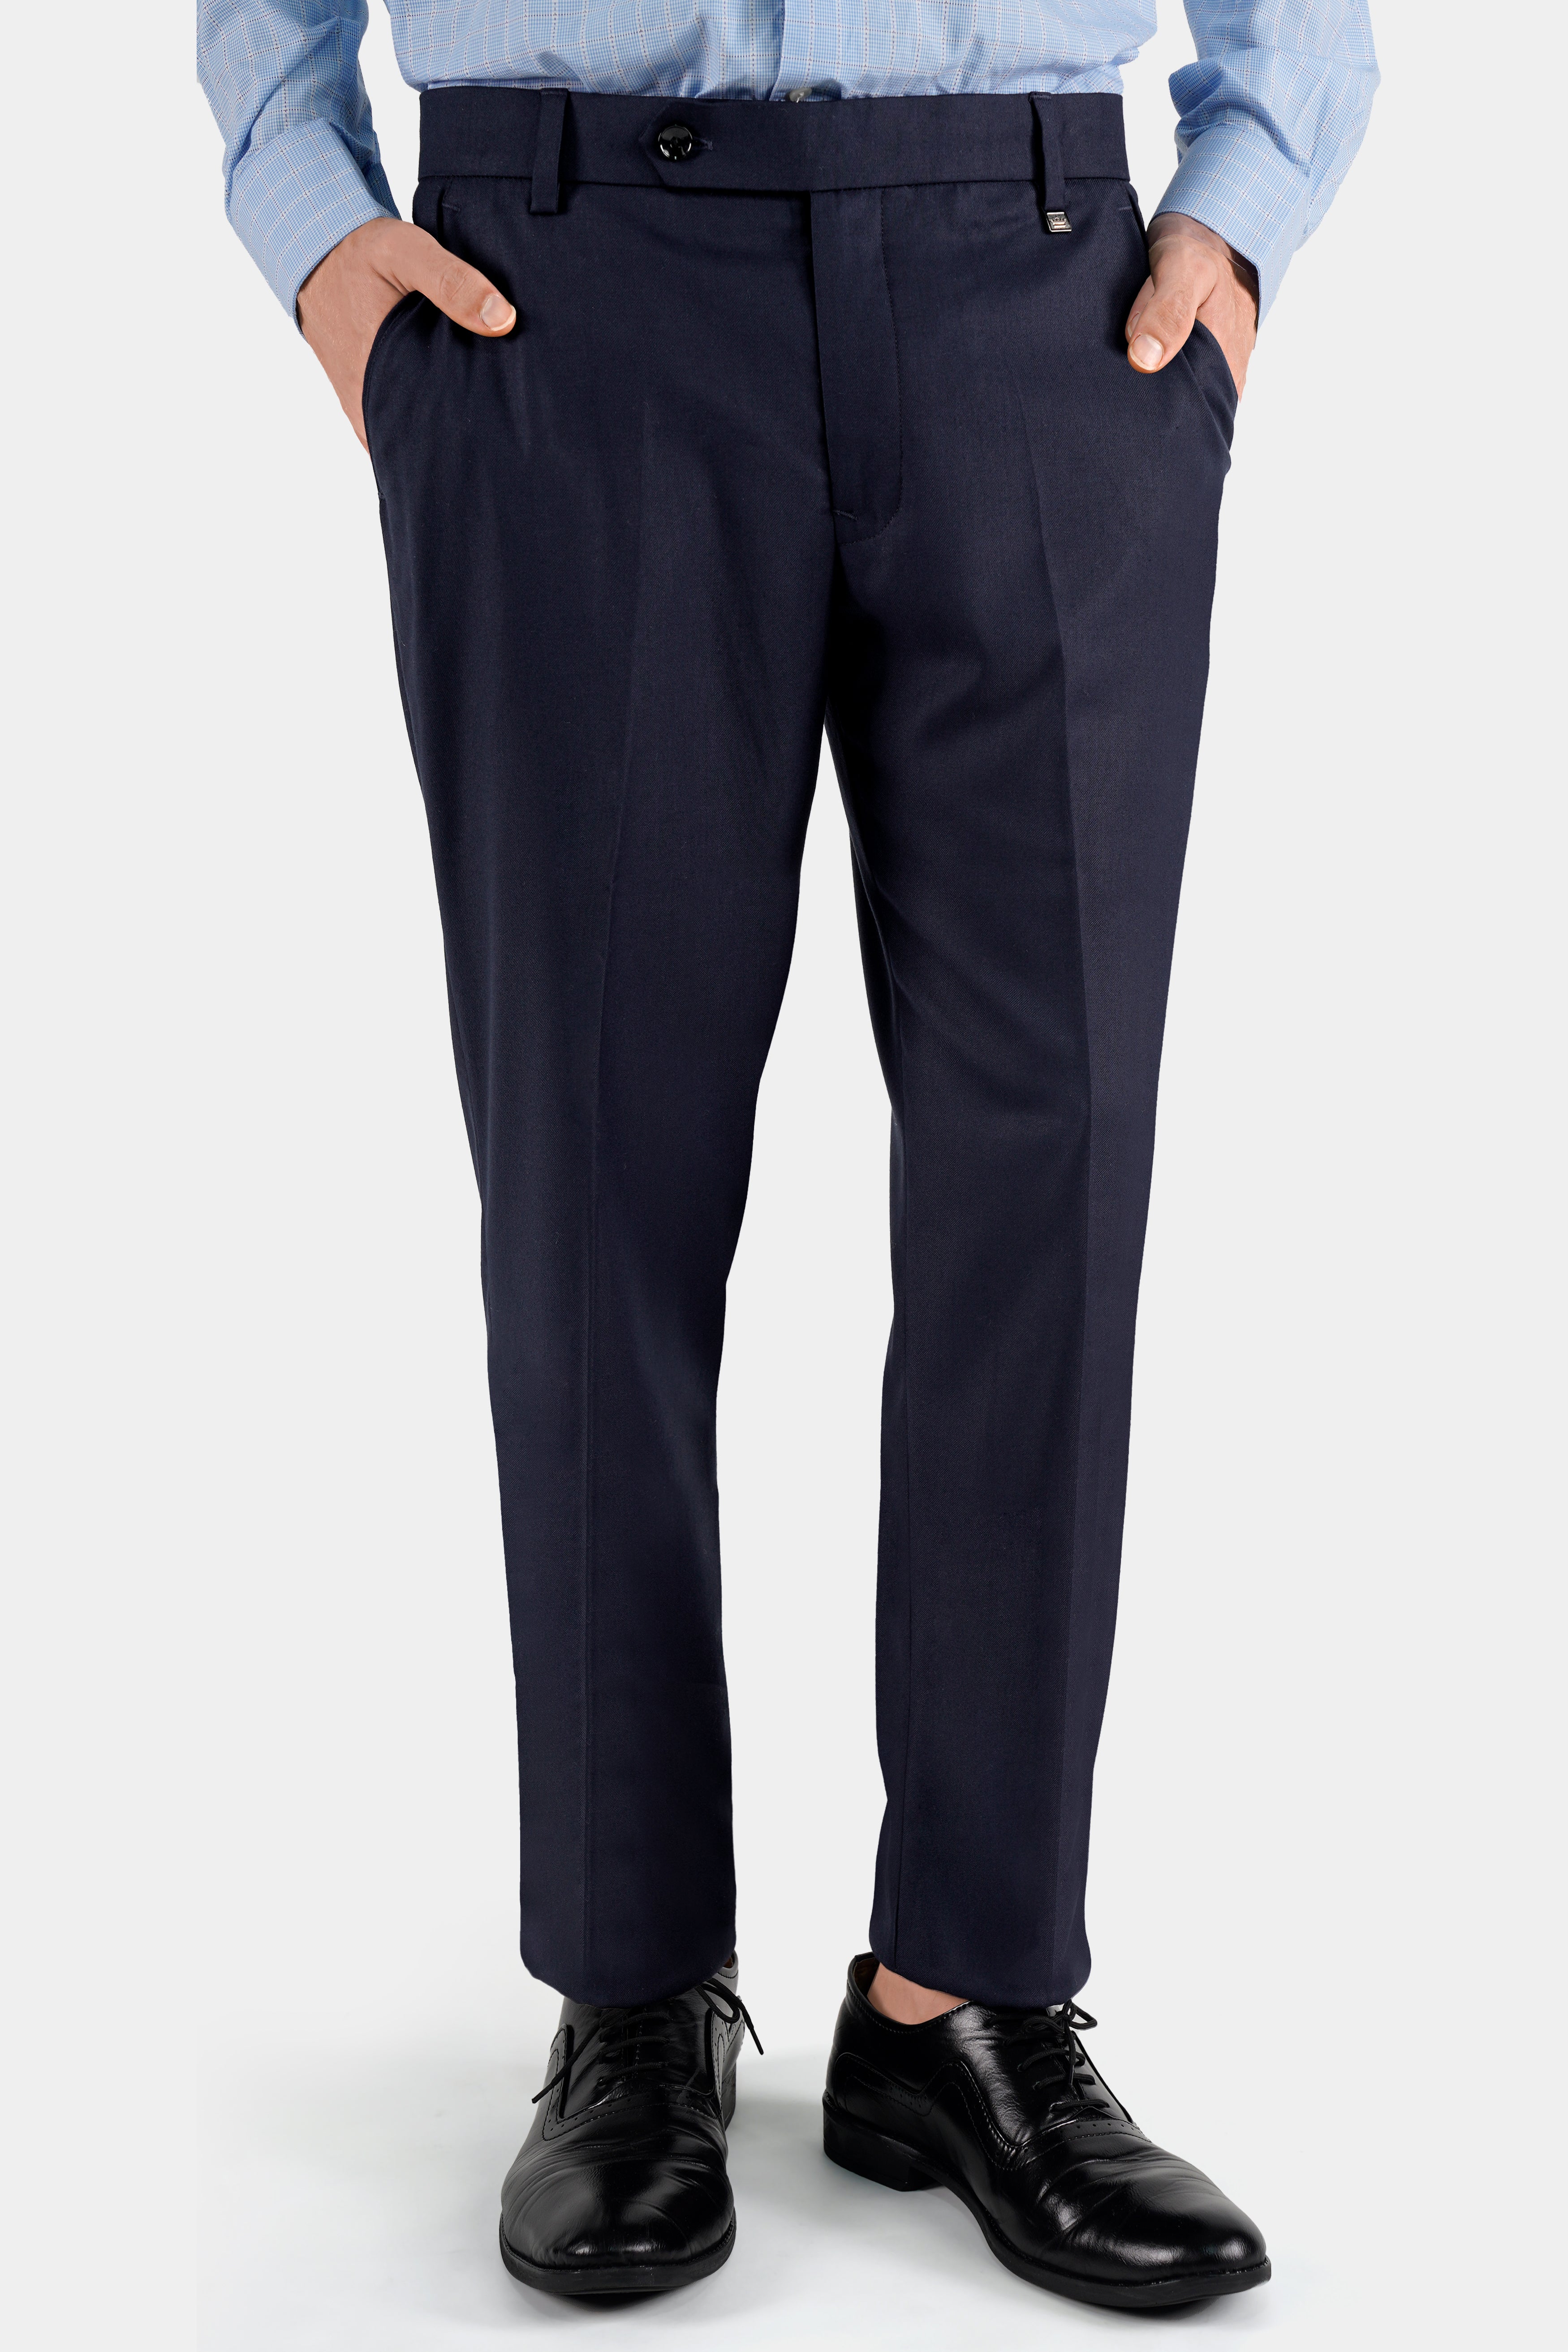 Indian Needle Men's Navy Cotton Polka Dots Formal Trousers – Jompers